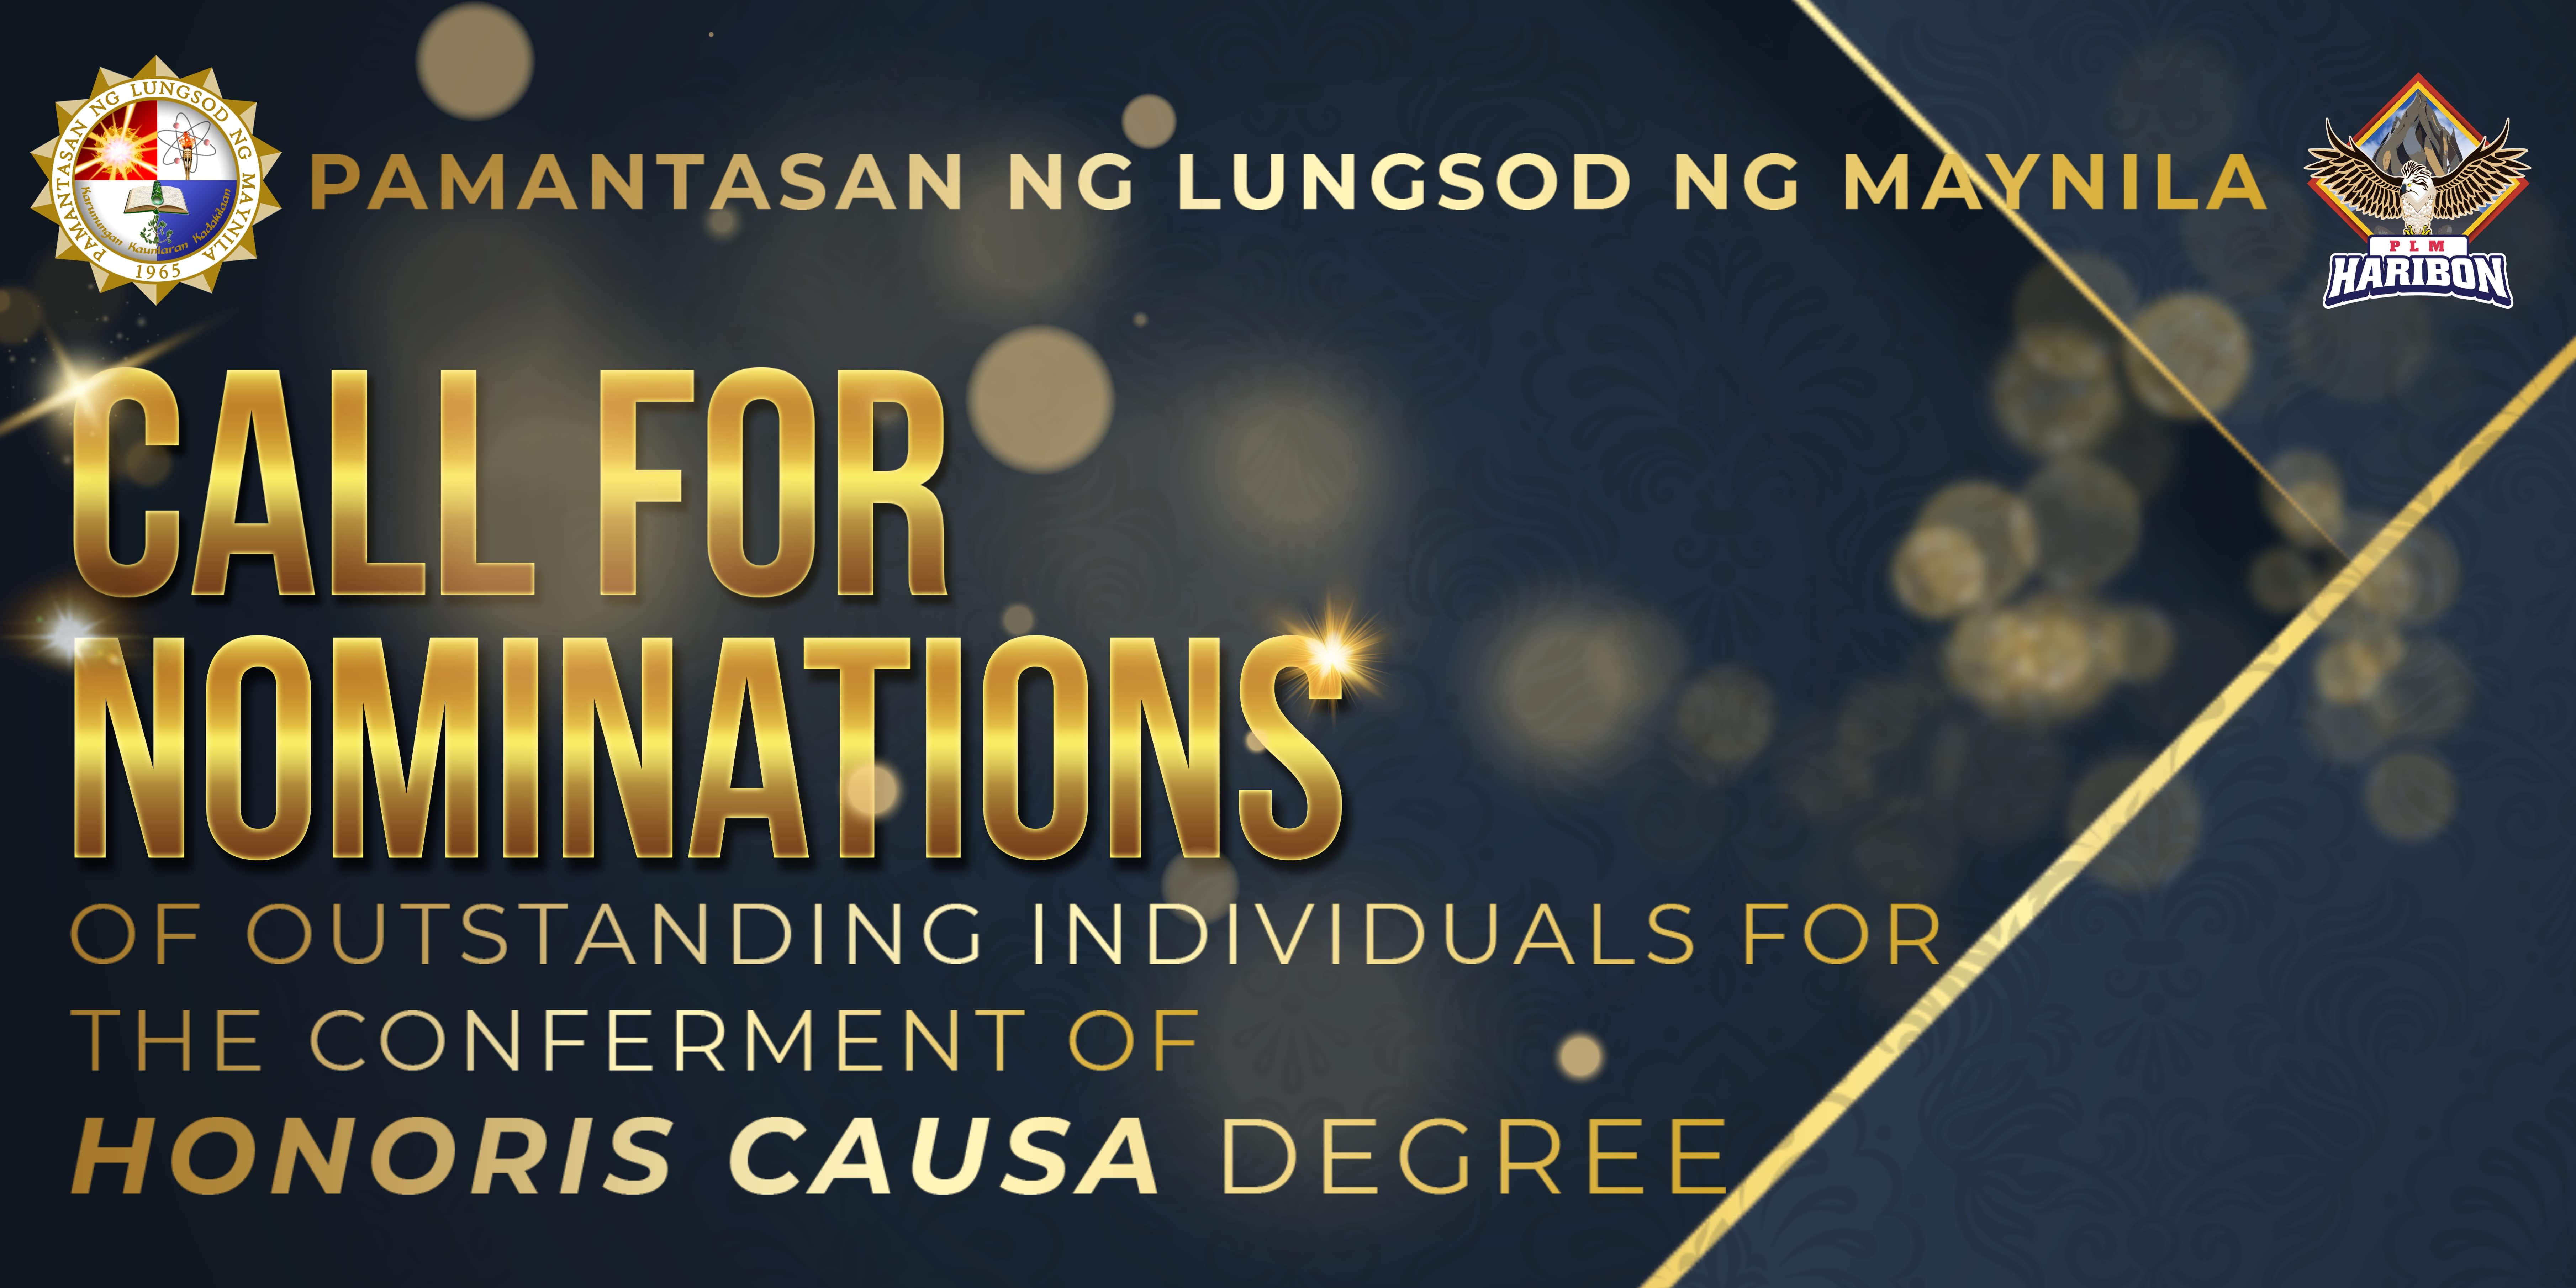 Call for Nominations of Outstanding Individuals for the Conferment of Honoris Causa Degree